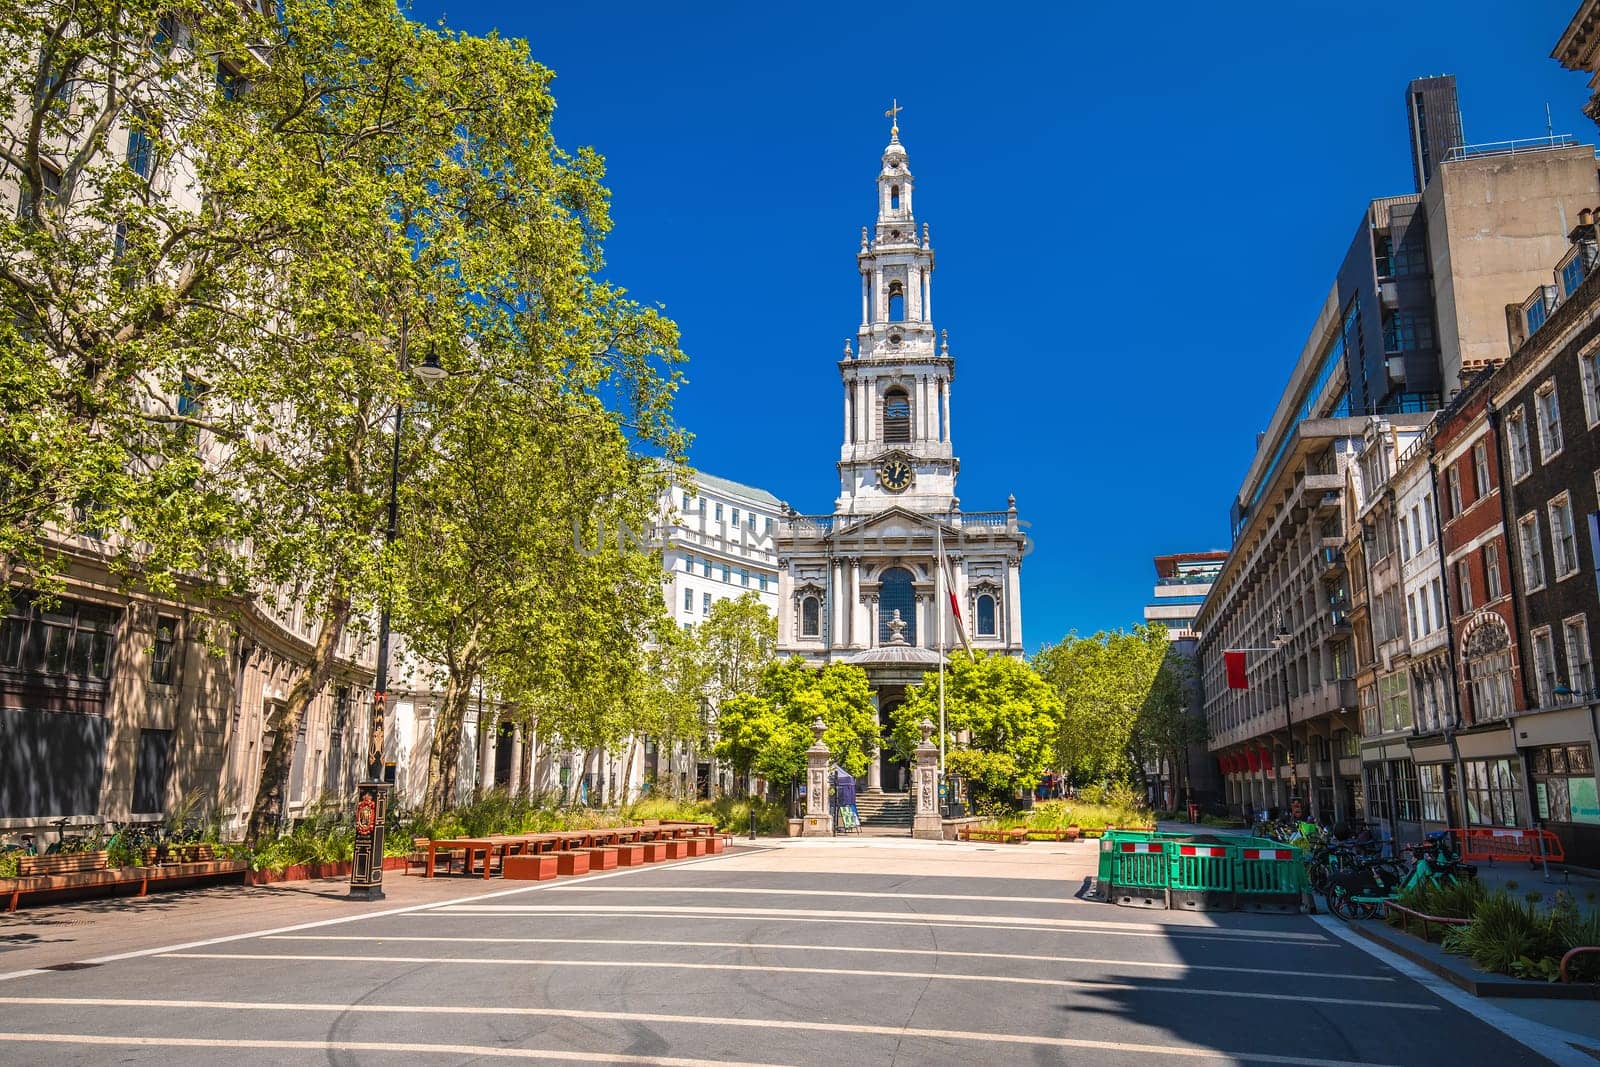 St Clement Danes Church in London street view, capital of United Kingdom